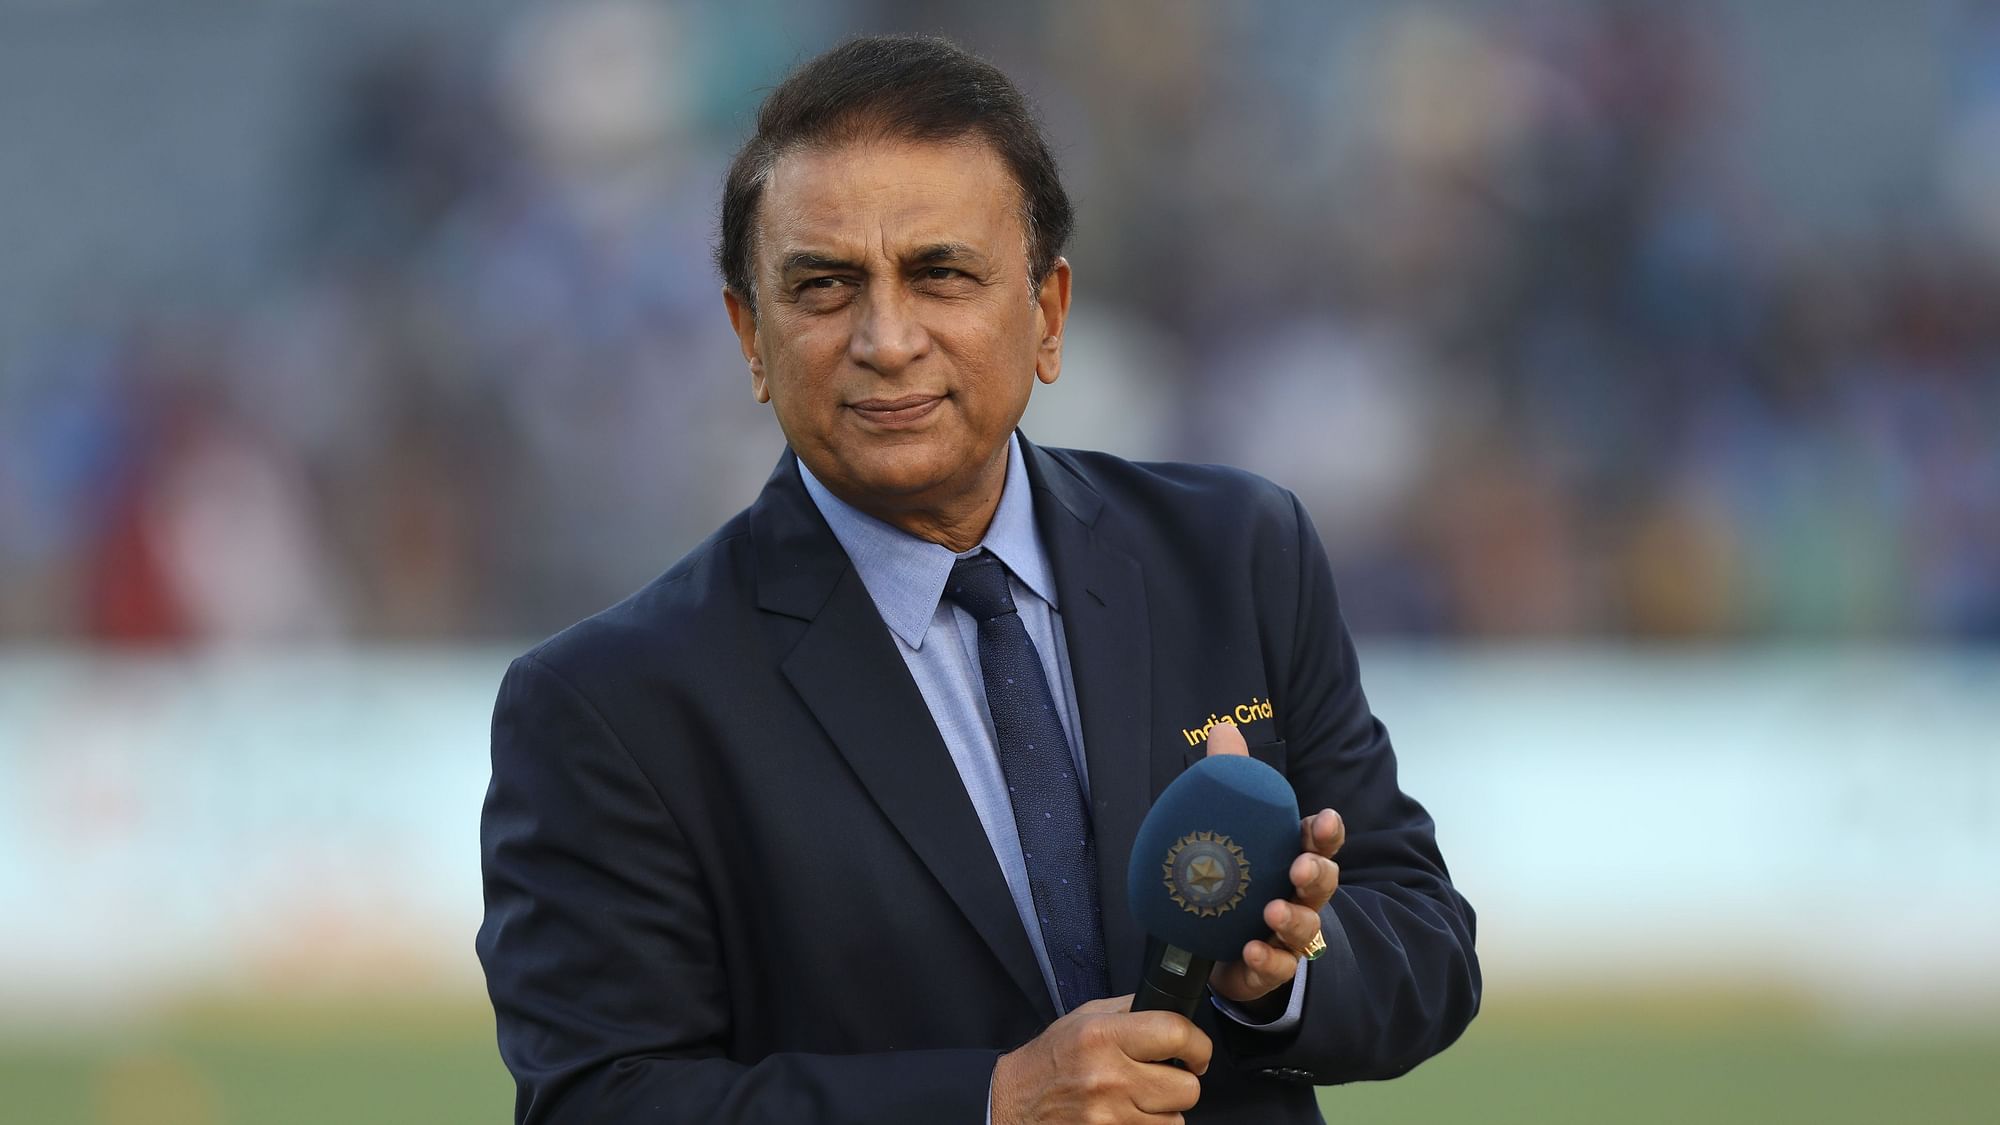 Sunil Gavaskar was part of the India team that was shot out for 42 by England at Lord’s over 46 years ago.